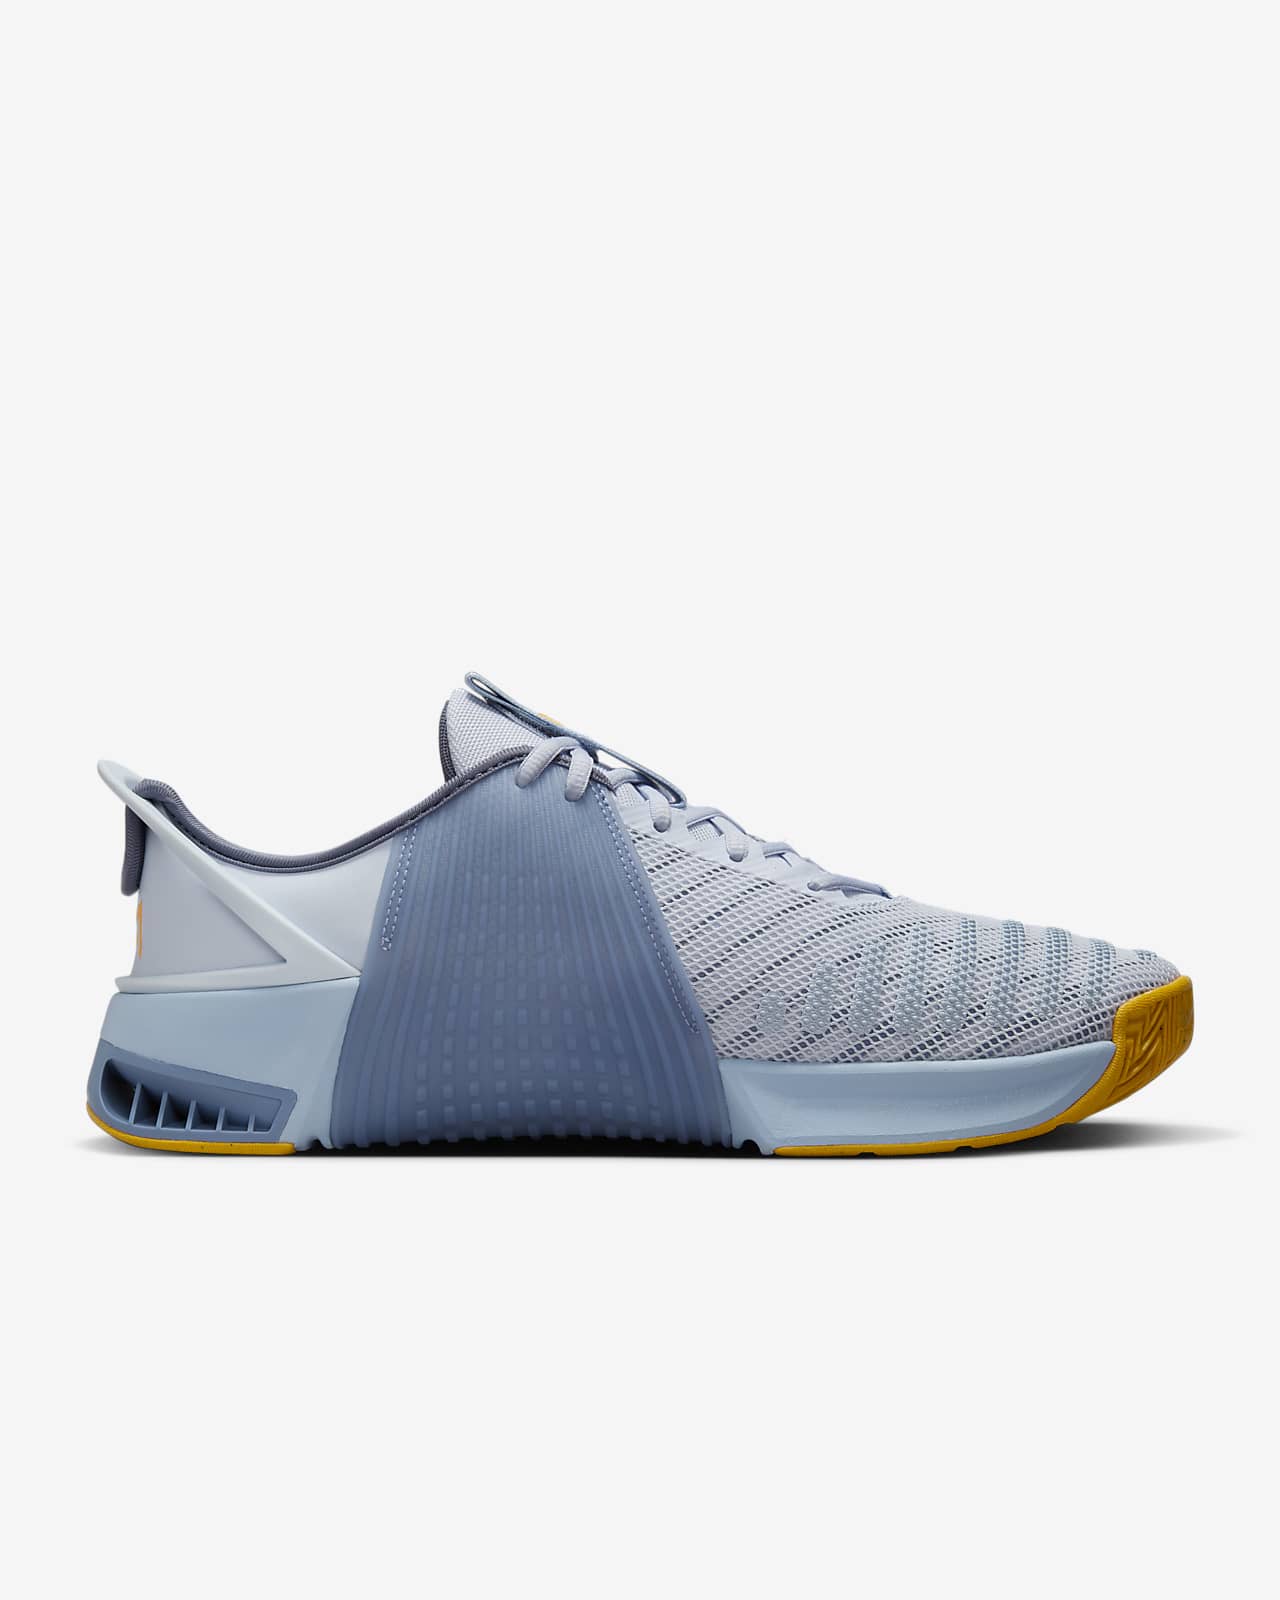 Man Shoes for CrossFit Nike Metcon 9 - white blue 